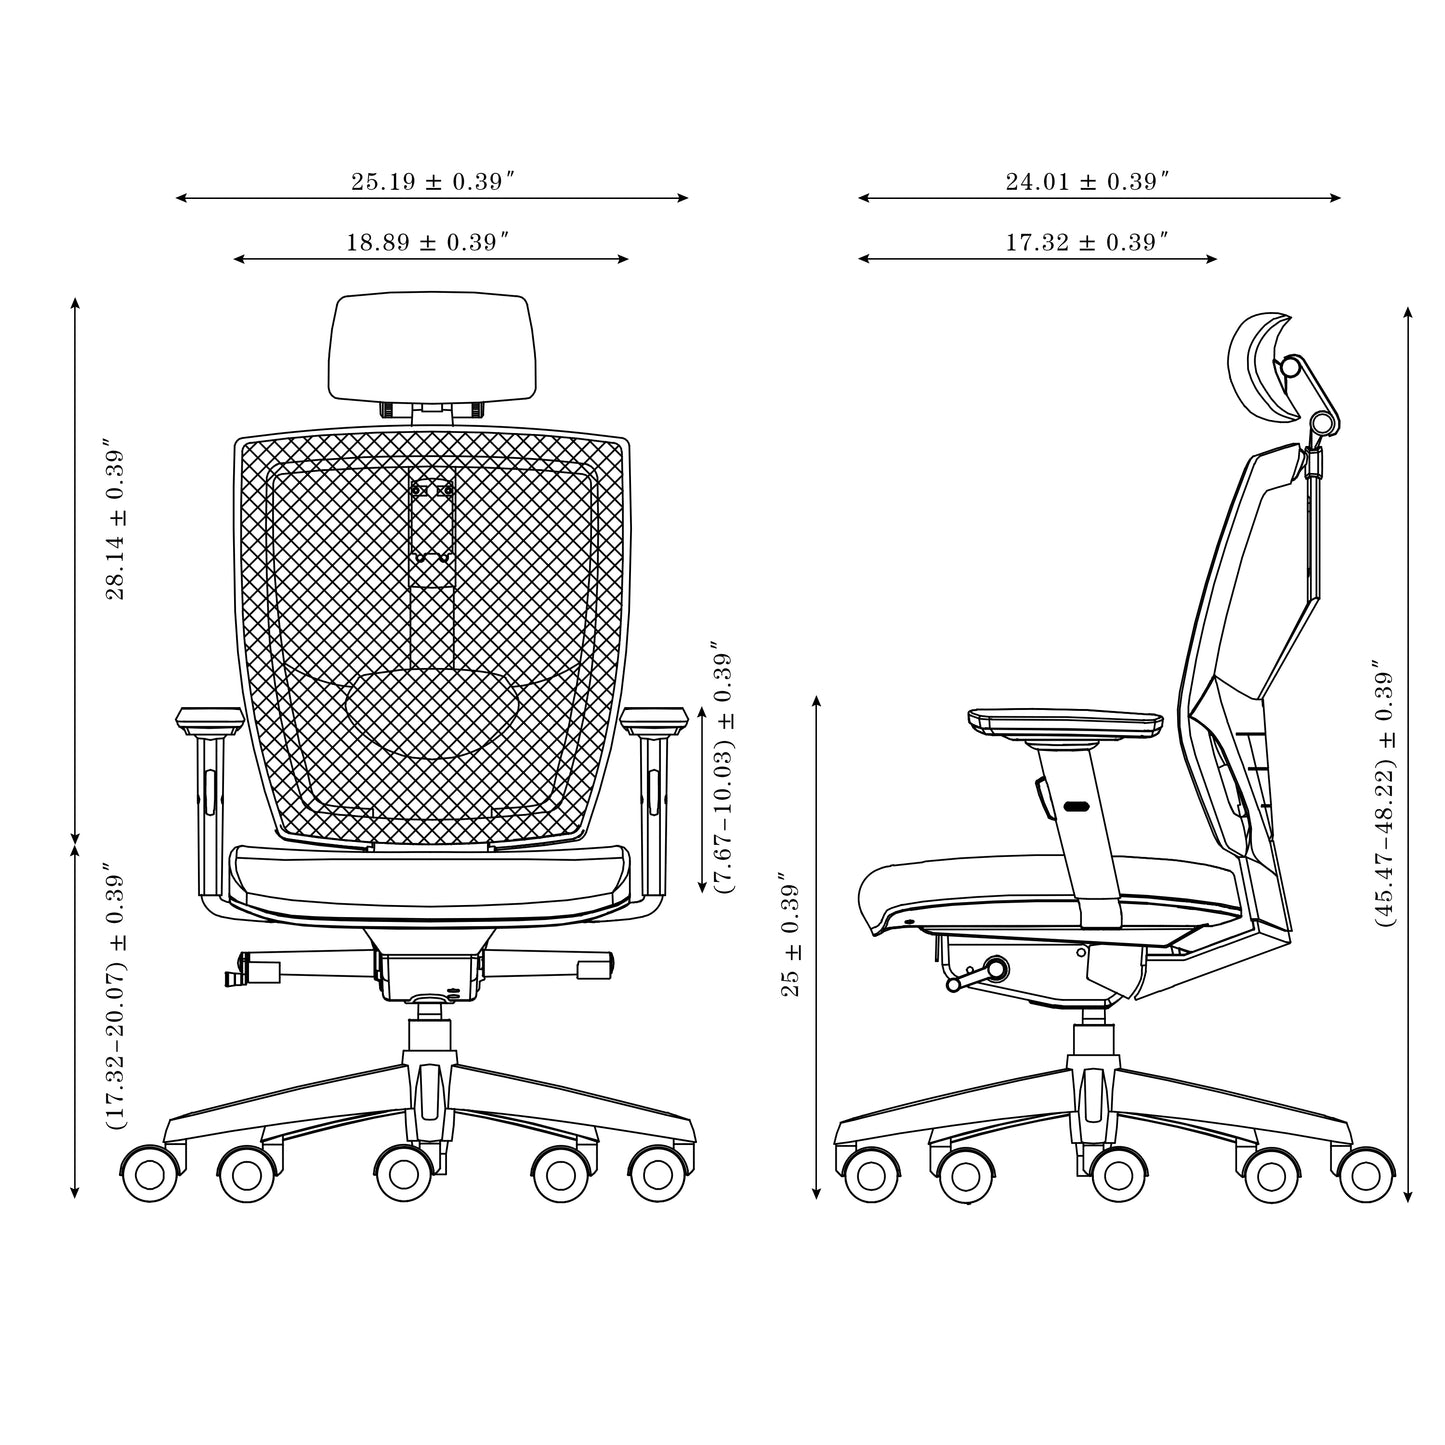 ALFA Executive Task Chair with Head Rest Multifunctional Chair for Home & Office Adjustable Back and Armrest Chair 207